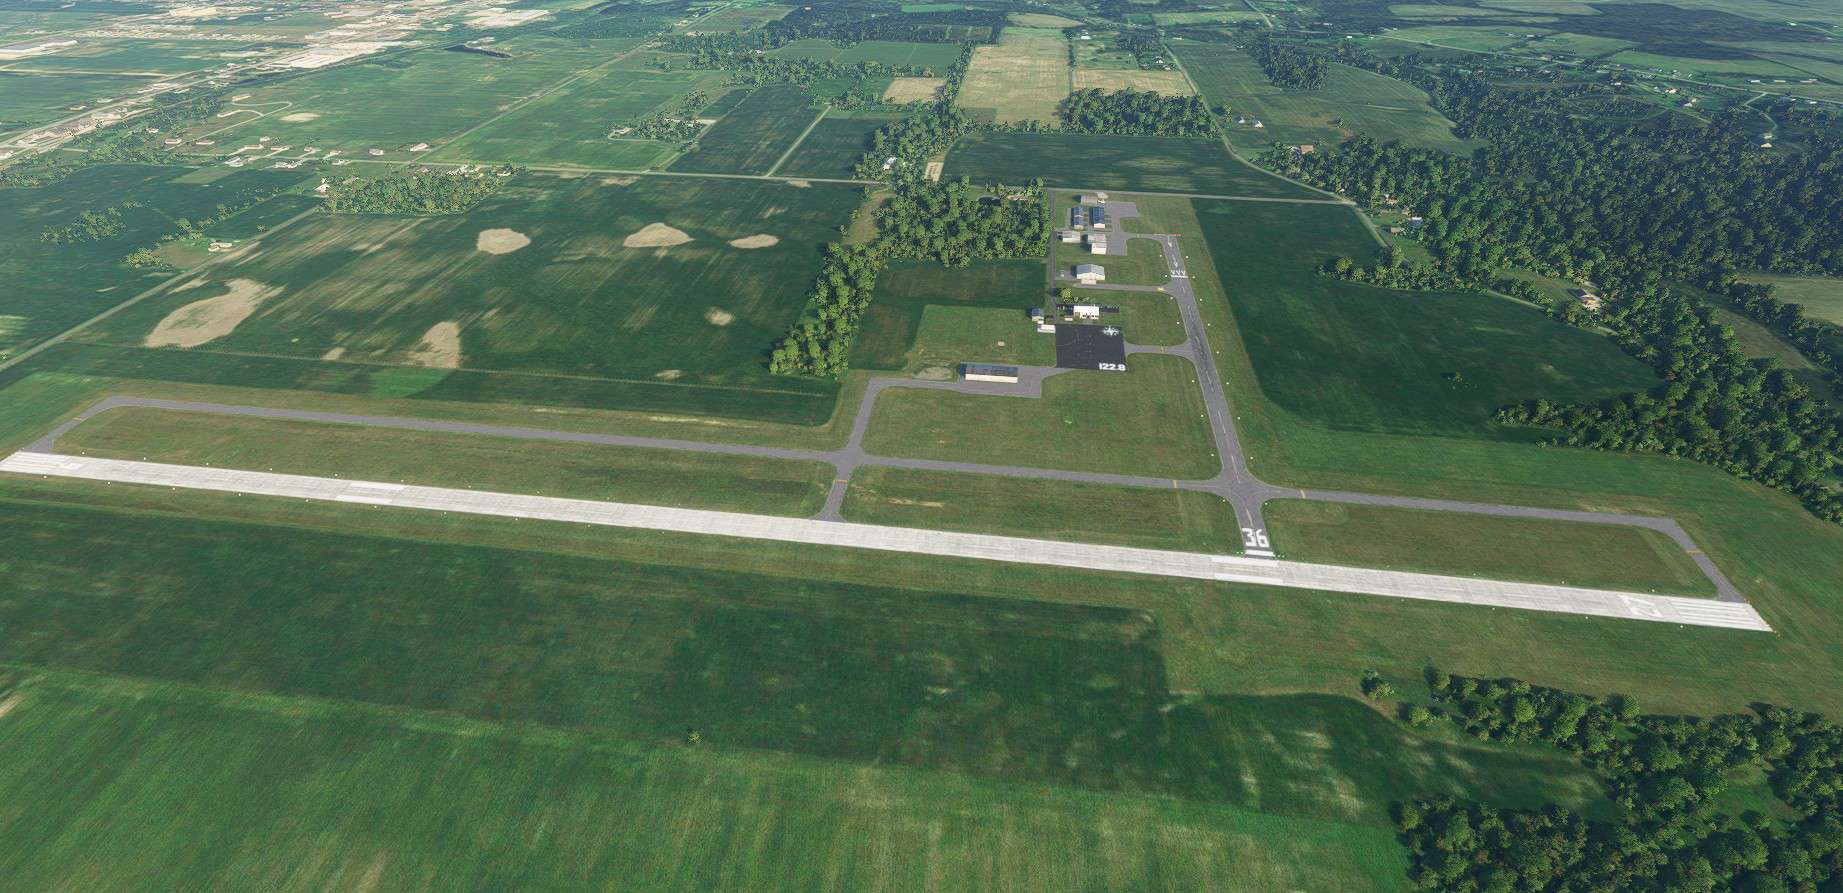 Indiana Megaproject - Currently 4 airports - Over 10000 veg-water-terrain  edits - MSFS2020 Scenery Mod